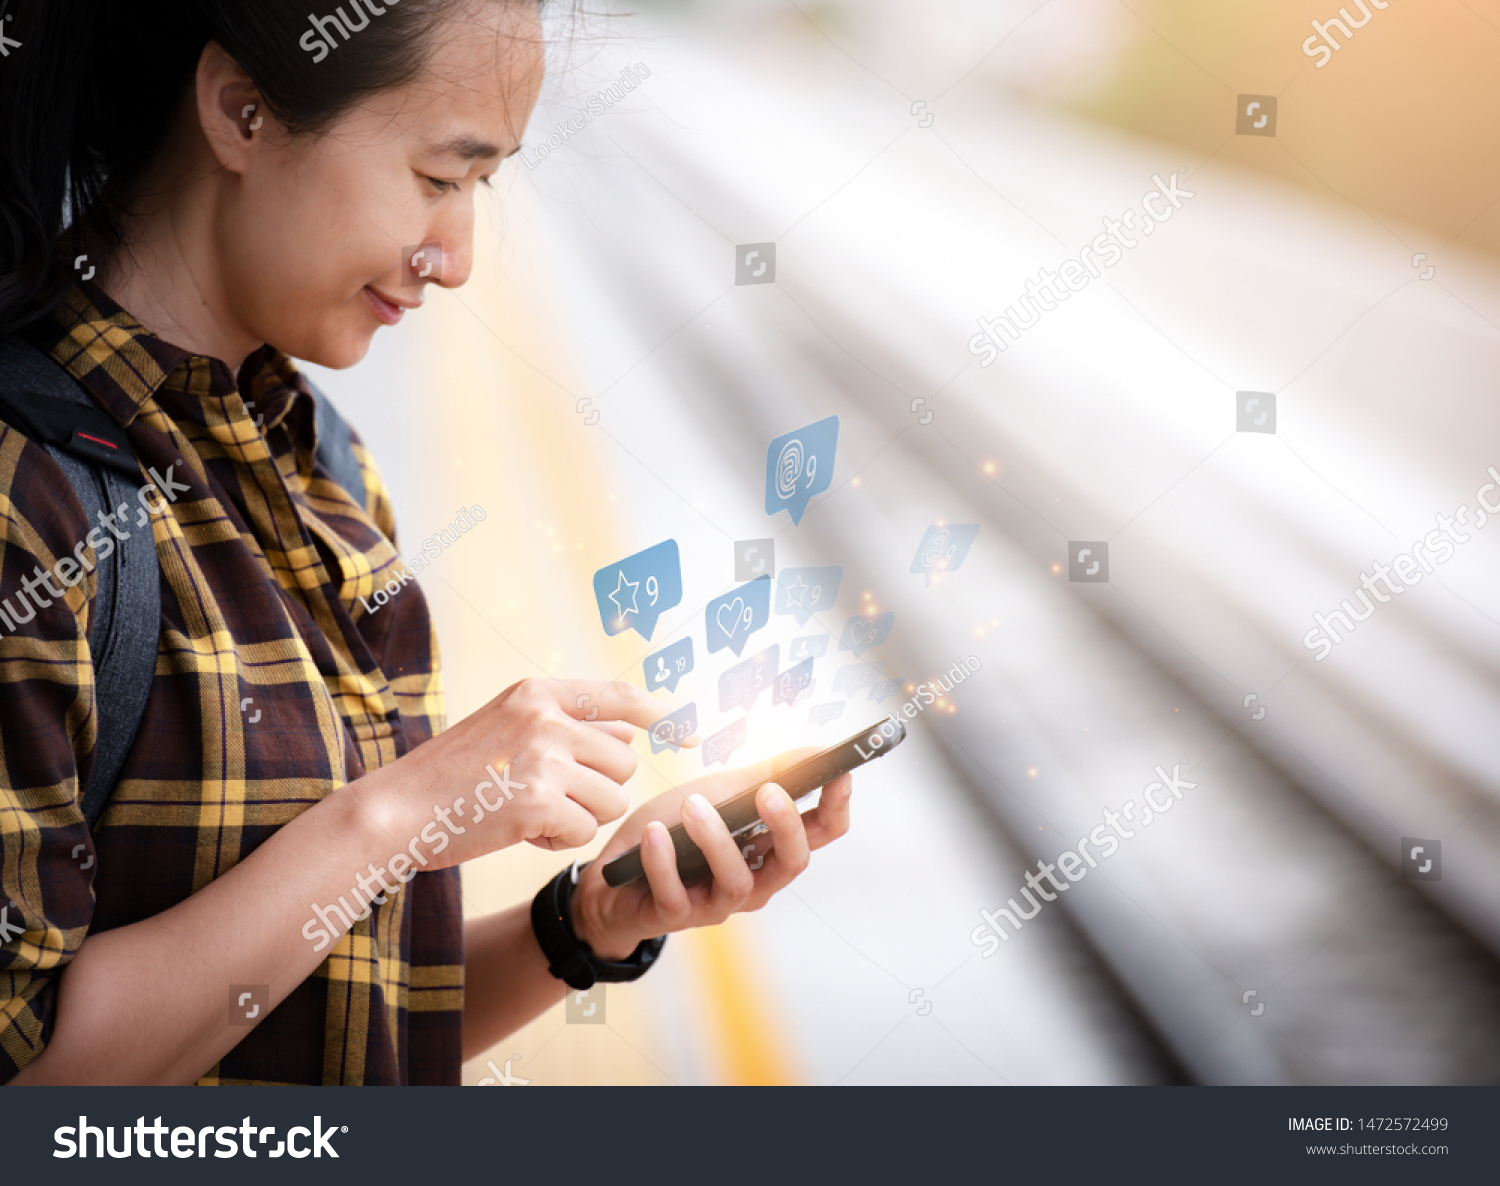 Beautiful asian girl Standing waiting for the train And she is using smartphone To find information on tourism. Travel and tourism concept.social media. #1472572499